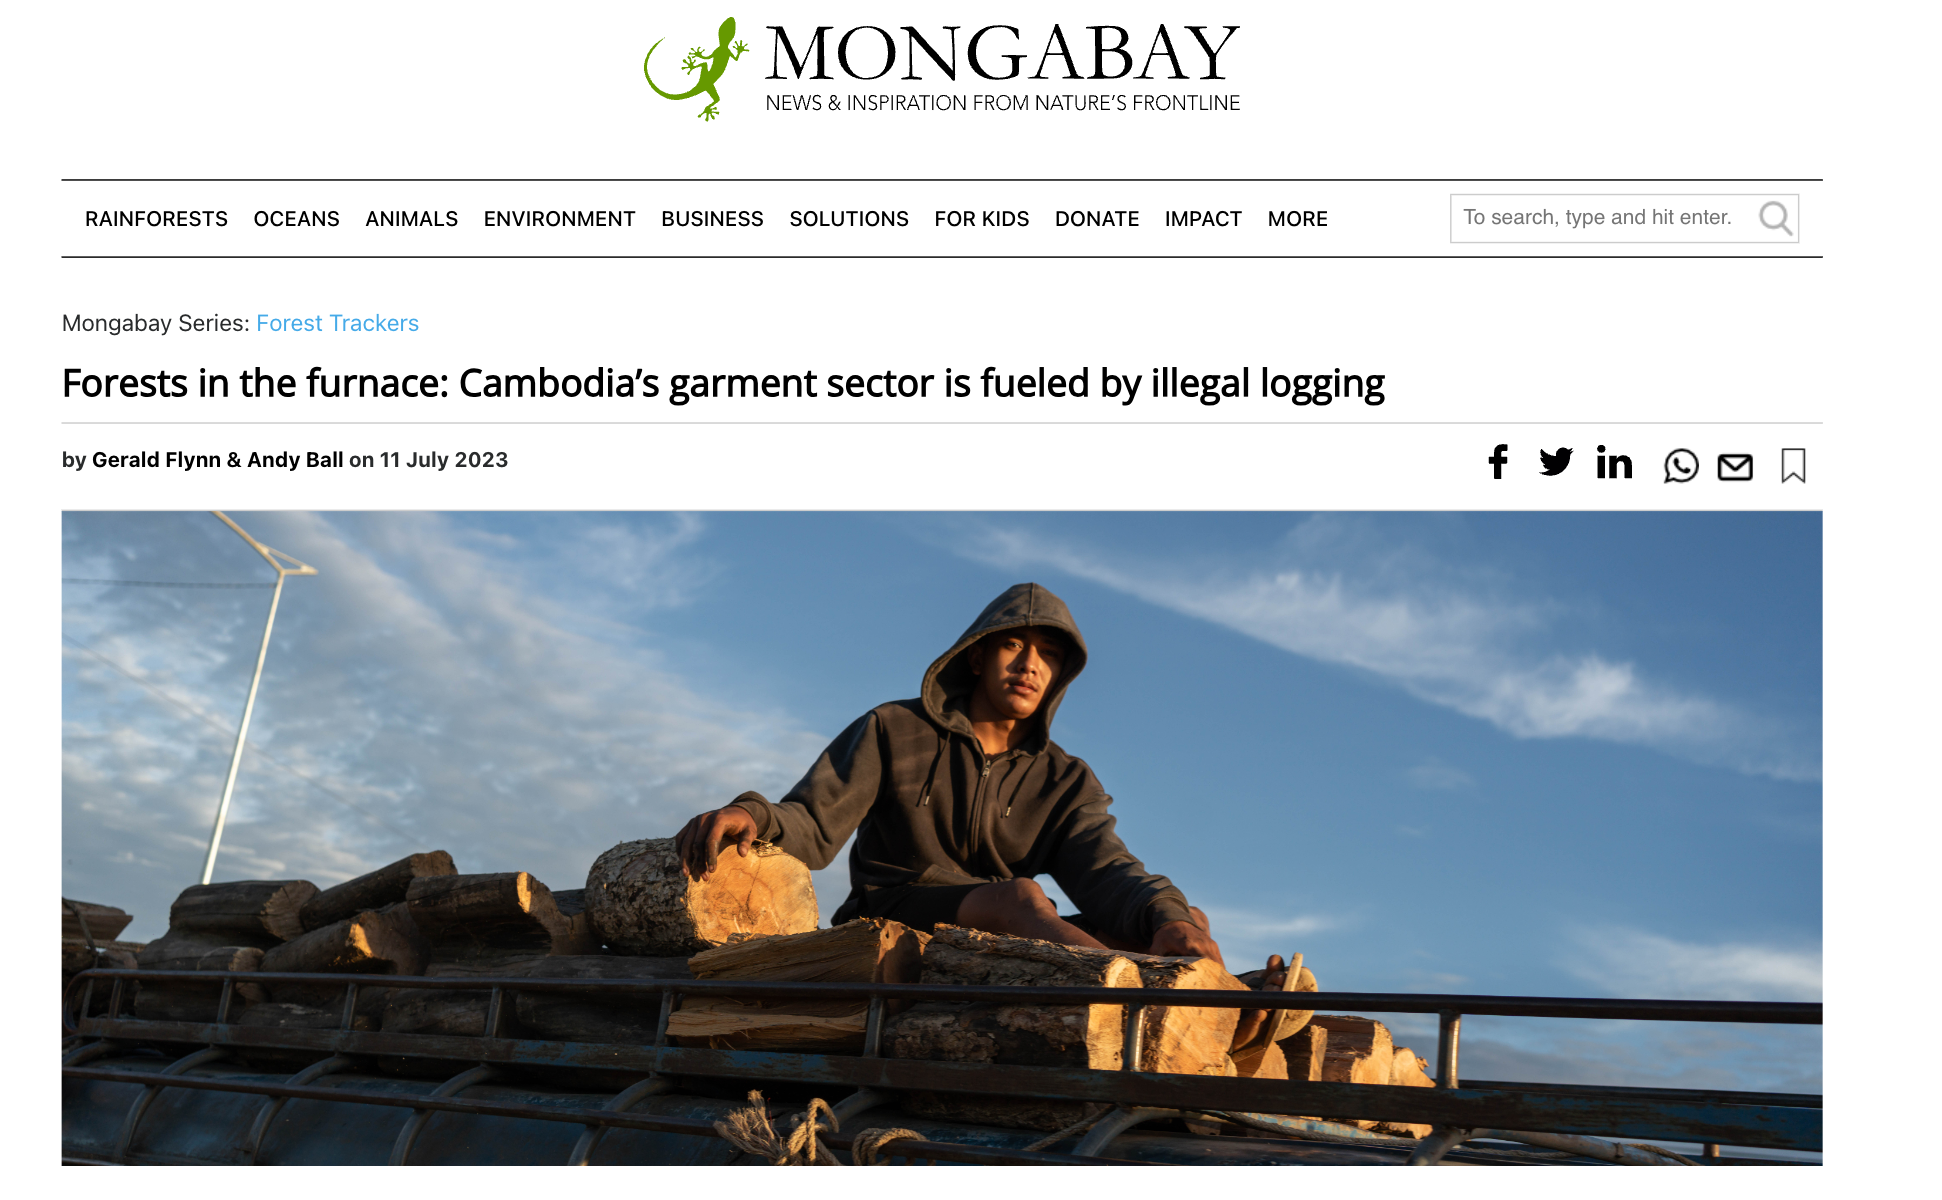 11th July 2023 Forests in the furance Cambodia's garment sector is fueled by illegal logging - Mongabay.png